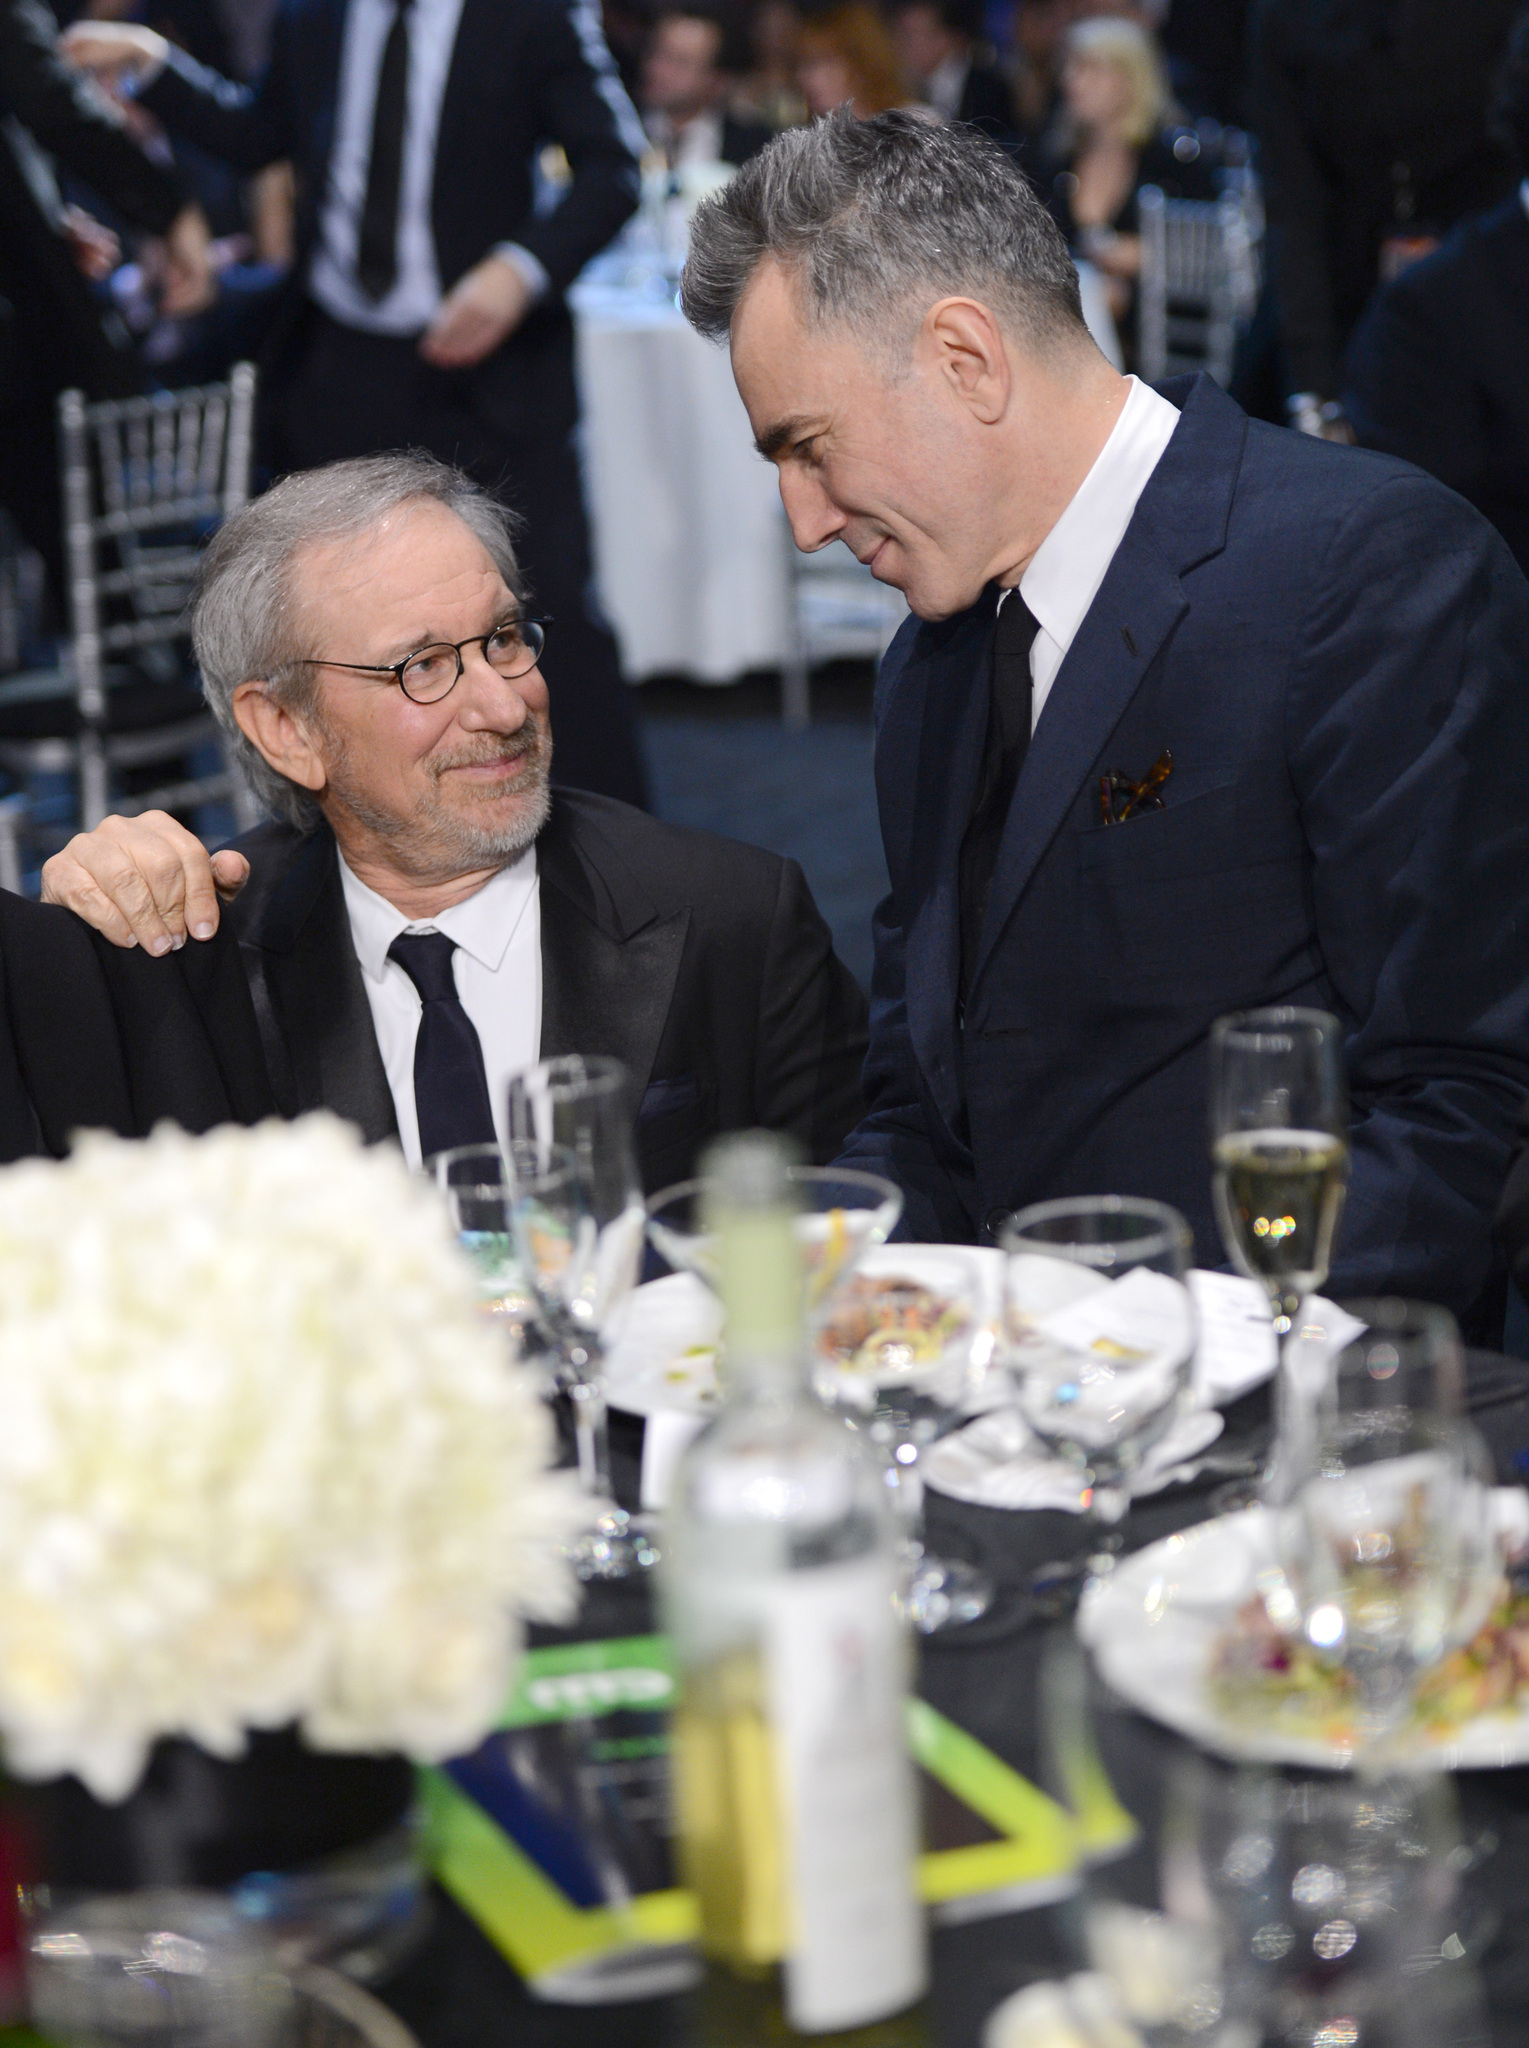 Steven Spielberg and Daniel Day-Lewis